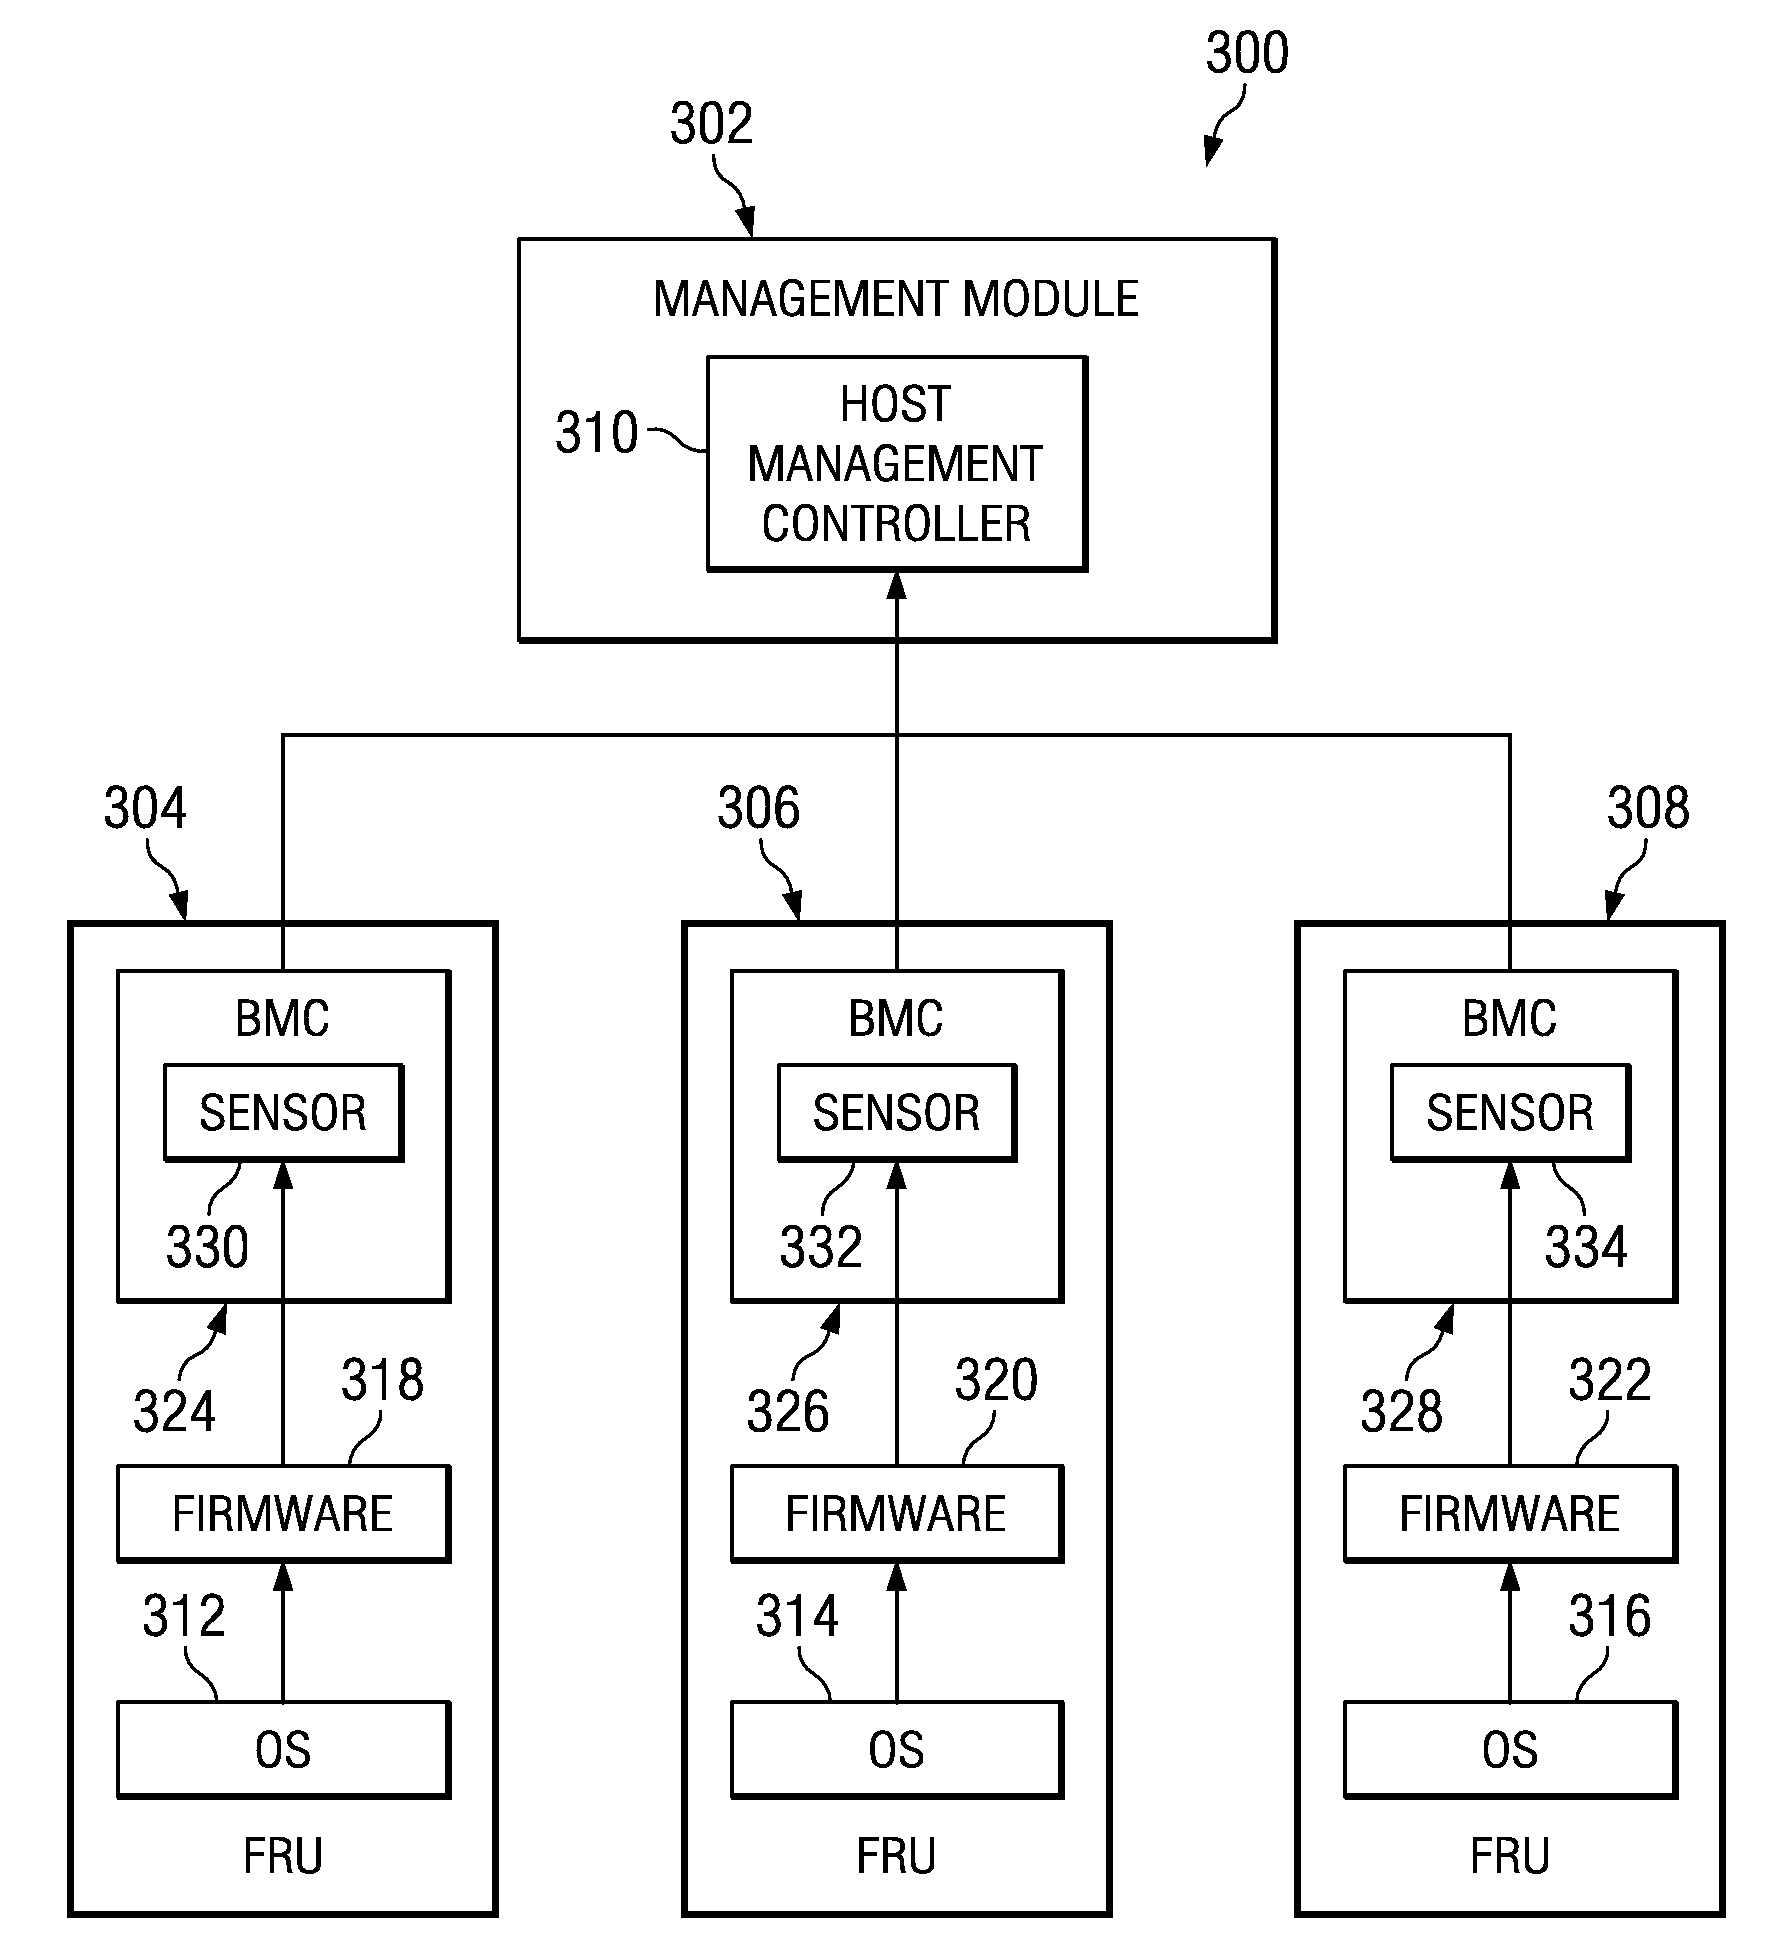 Mechanism to report operating system events on an intelligent platform management interface compliant server